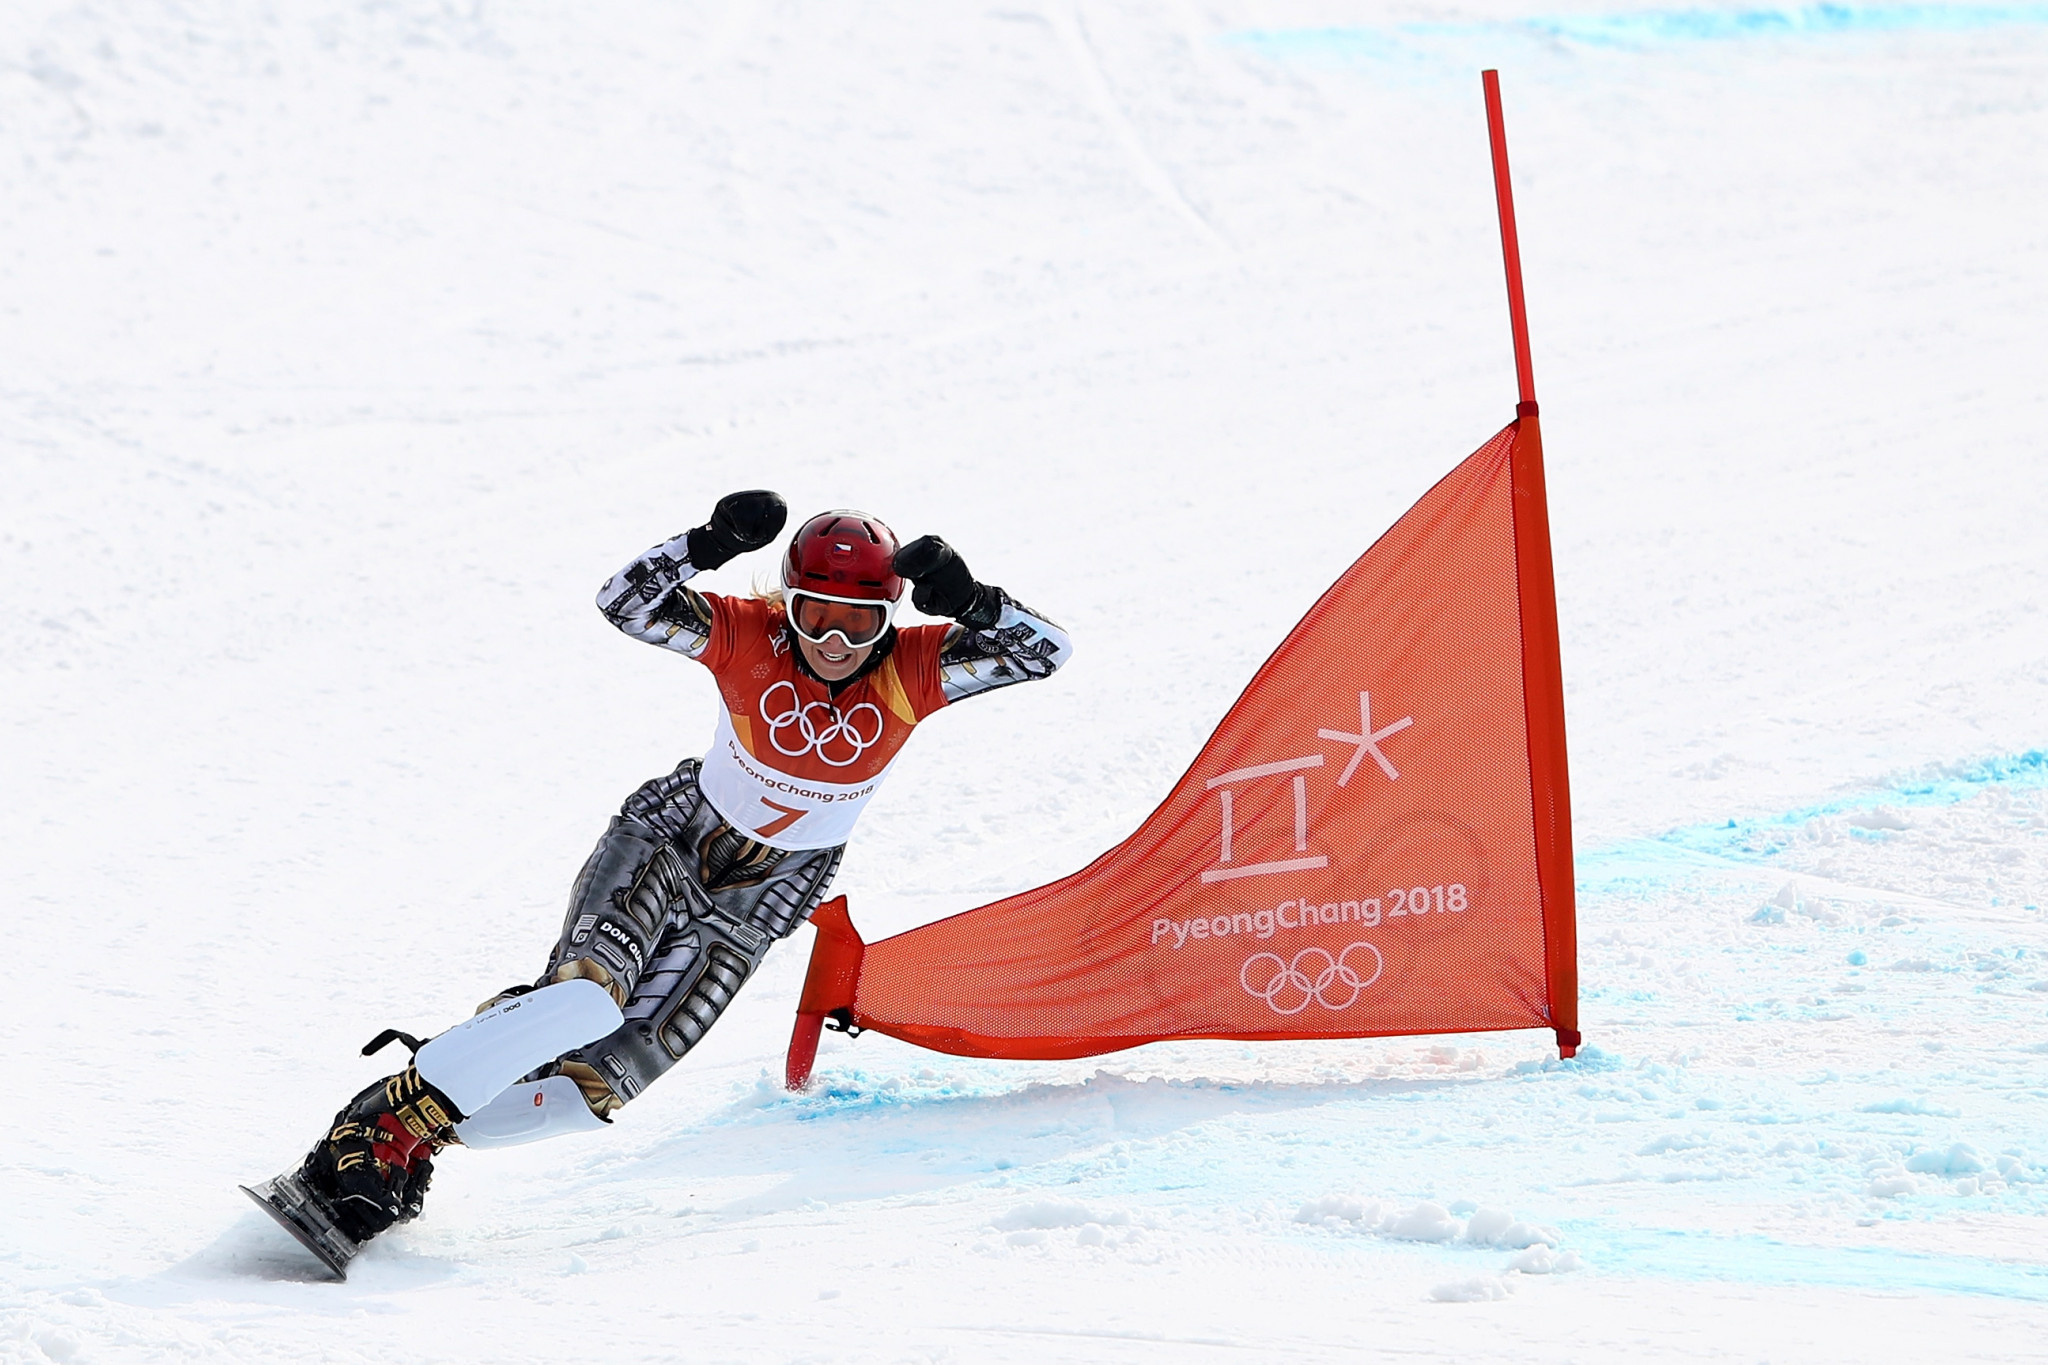 Gold in the parallel giant slalom snowboarding event at the 2011 Winter European Youth Olympic Festival in her native Czech Republic sent Ester Ledecká on her way to a historic Olympic double victory at Pyeongchang 2018 ©Getty Images  